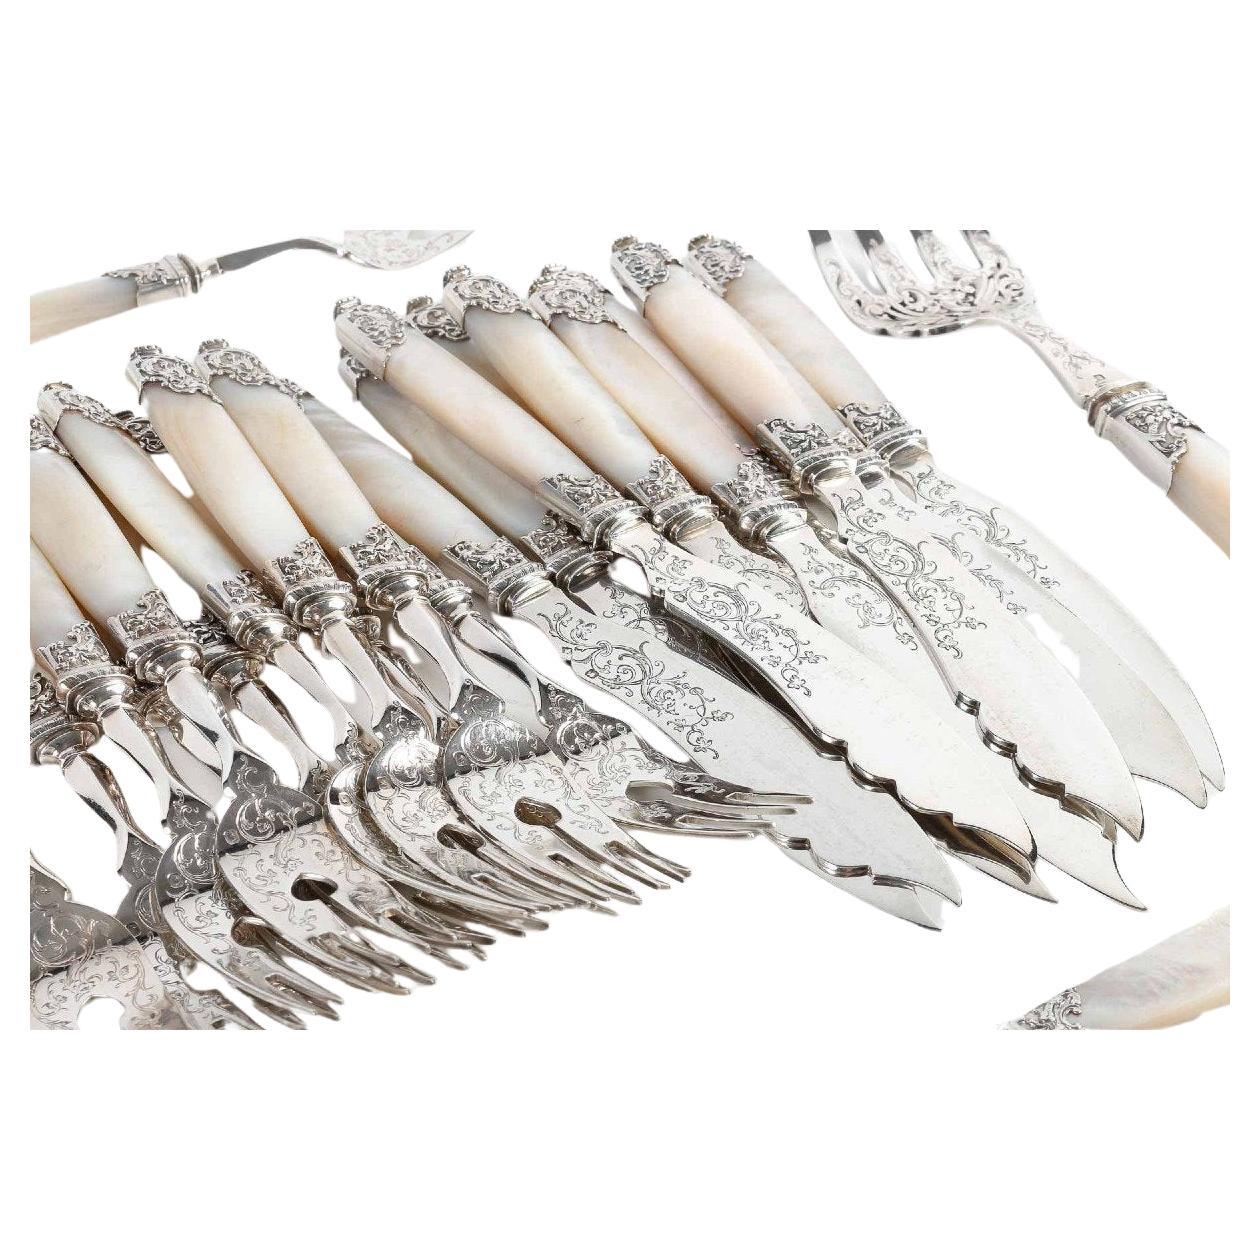 Goldsmith Merite 12 Solid Silver And Mother-Of-Pearl Fish Cutlery 19th Century